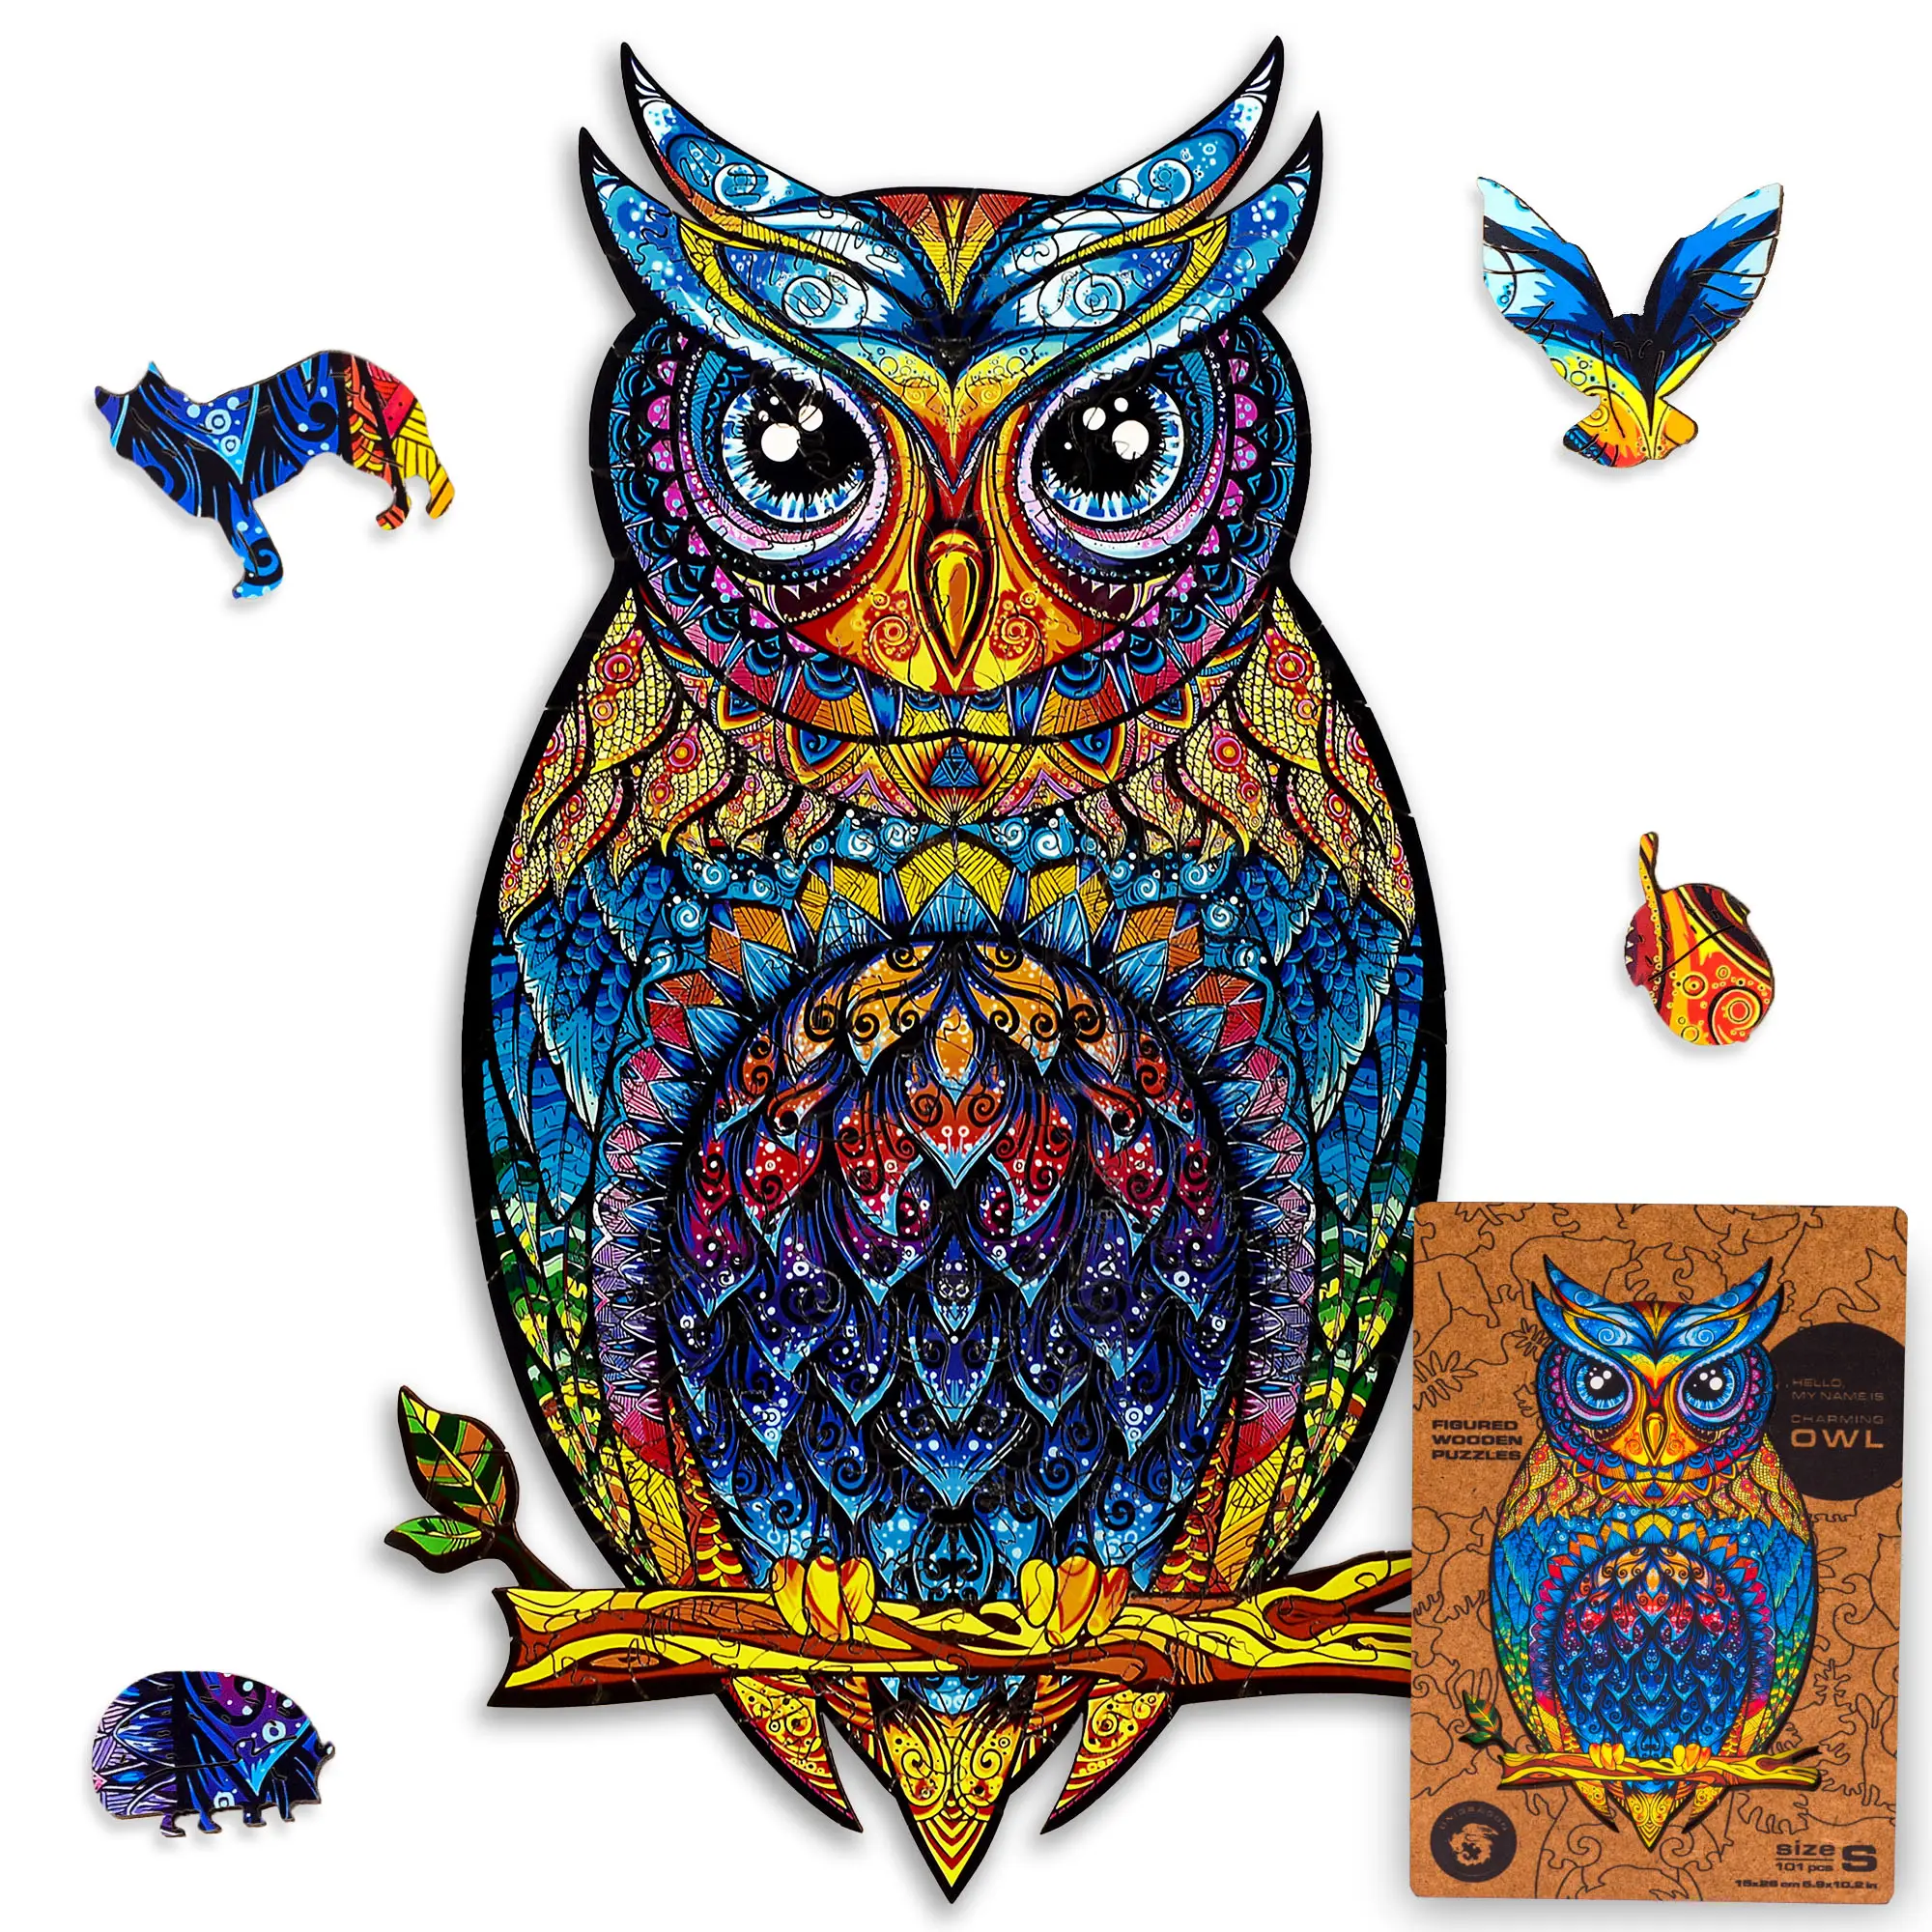 UNIDRAGON Charming Owl 101 pieces wooden puzzle. Wholesale promotional & business gifts 2023. Promotional toys